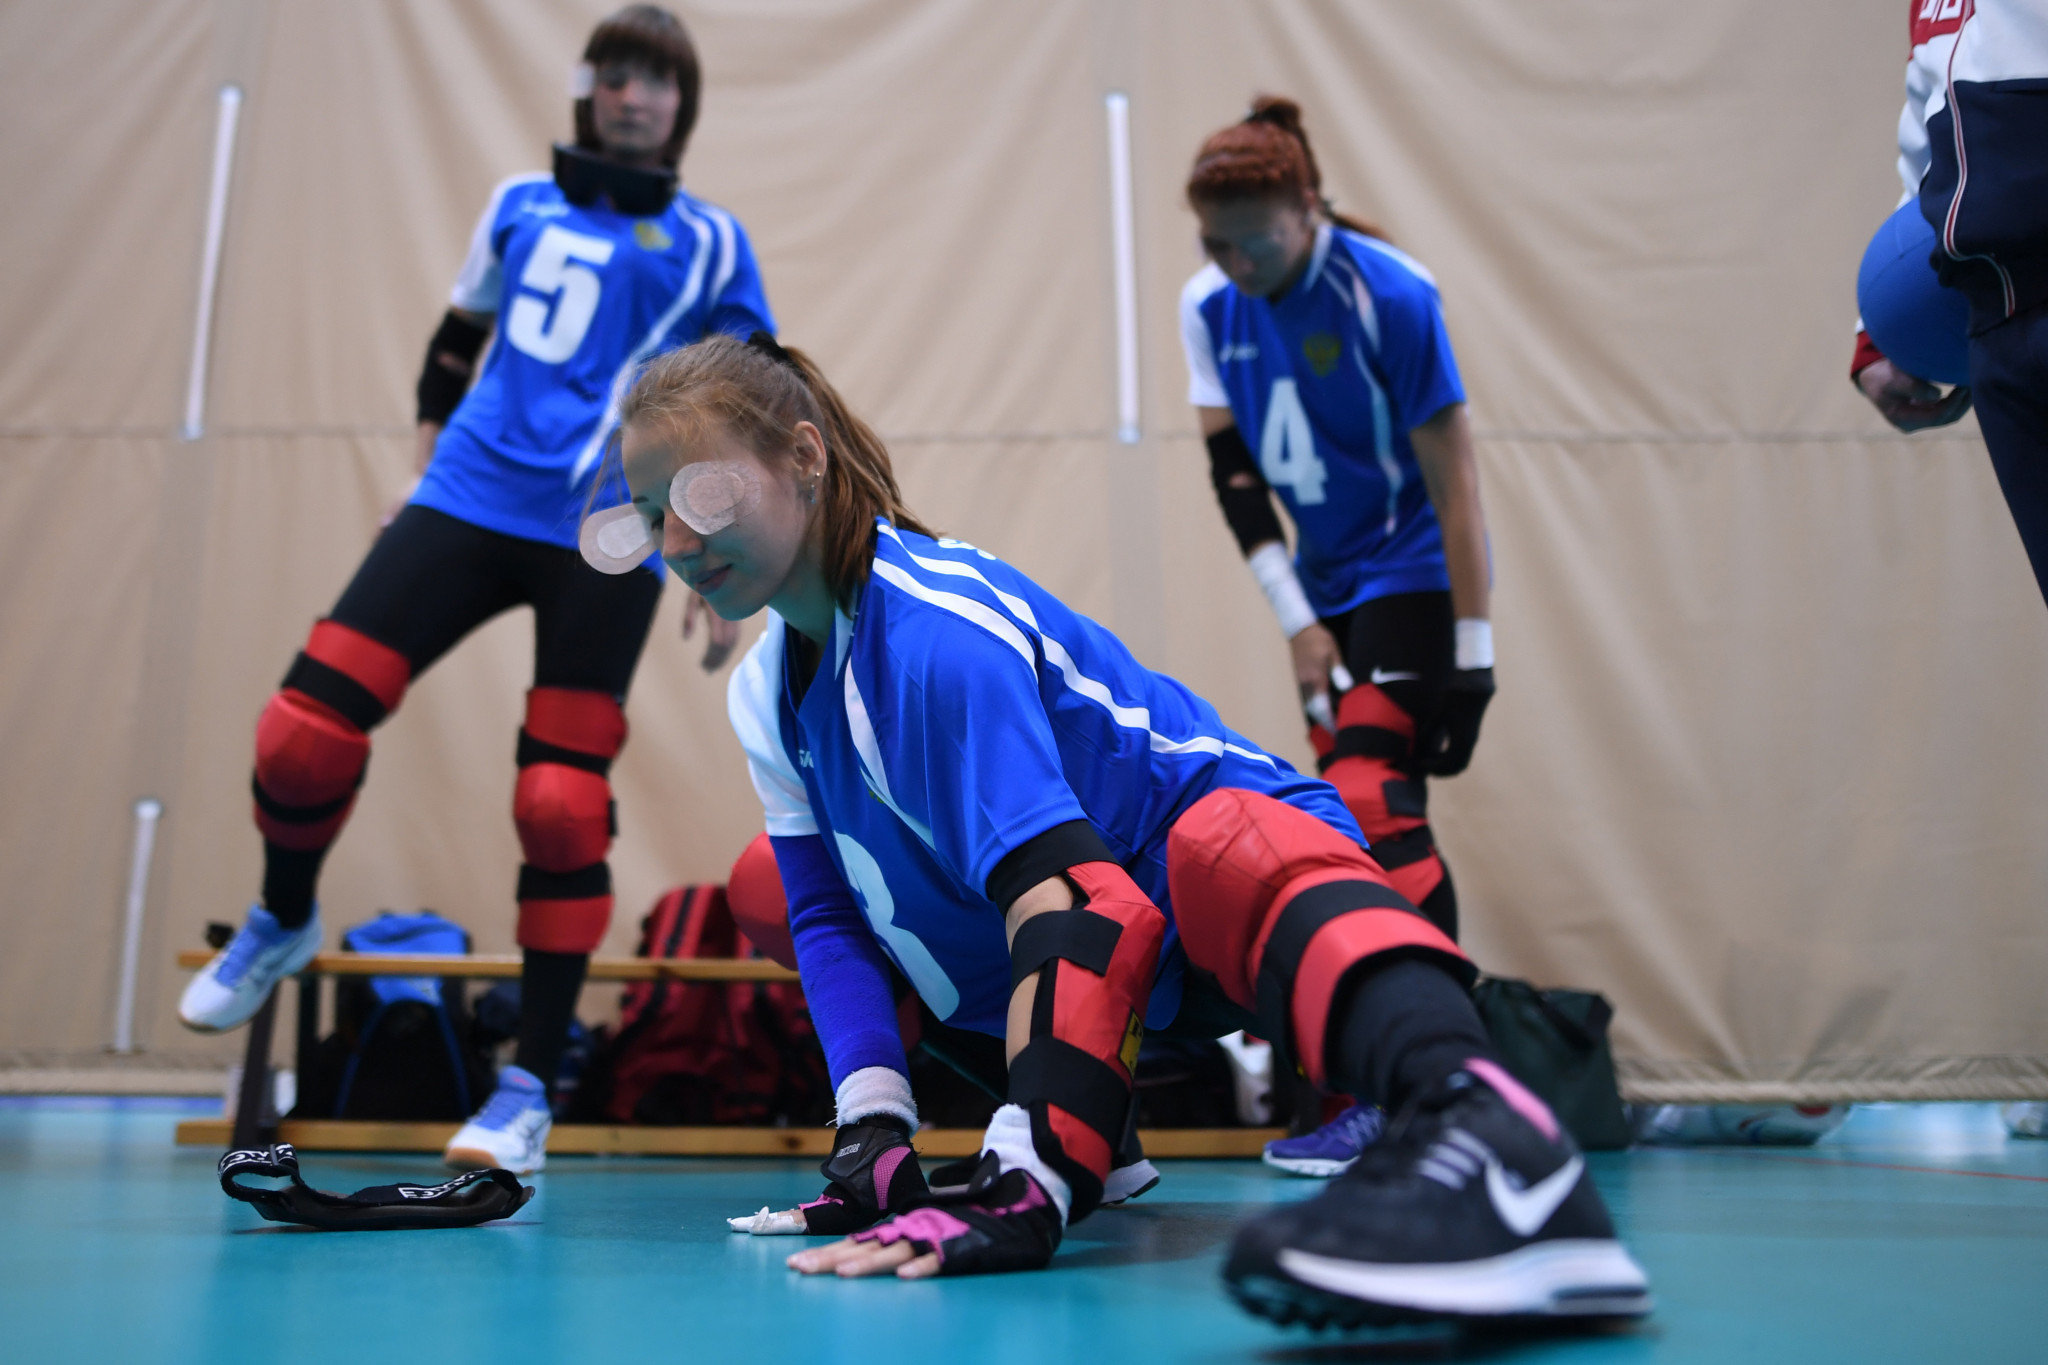 Russian Para-athletes warm up prior to a goalball game at the Novogorsk Training Center, outside Moscow, on September 8, 2016. It was part of the country's two-day competition for its athletes banned from the Rio 2016 Paralympic Games over evidence of state-run doping  ©Getty Images